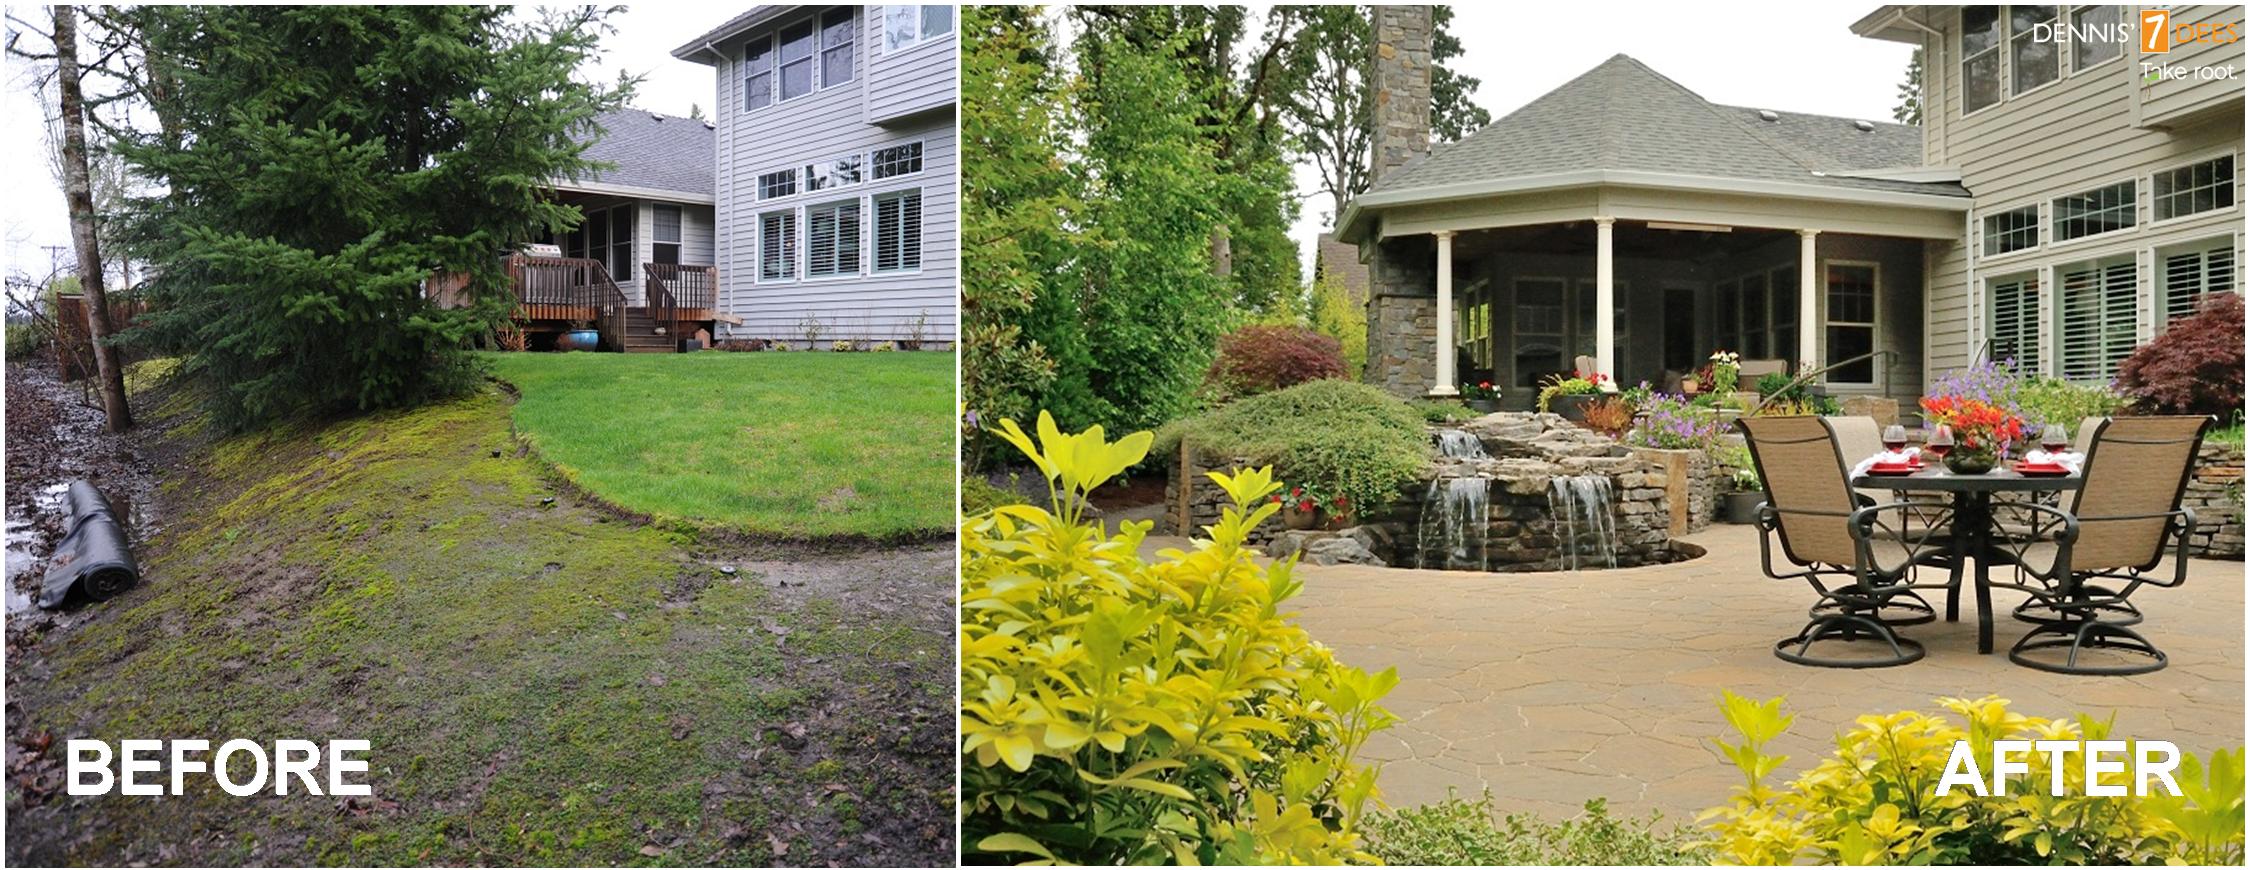 backyard-remodel-before-and-after_13944_2250_870